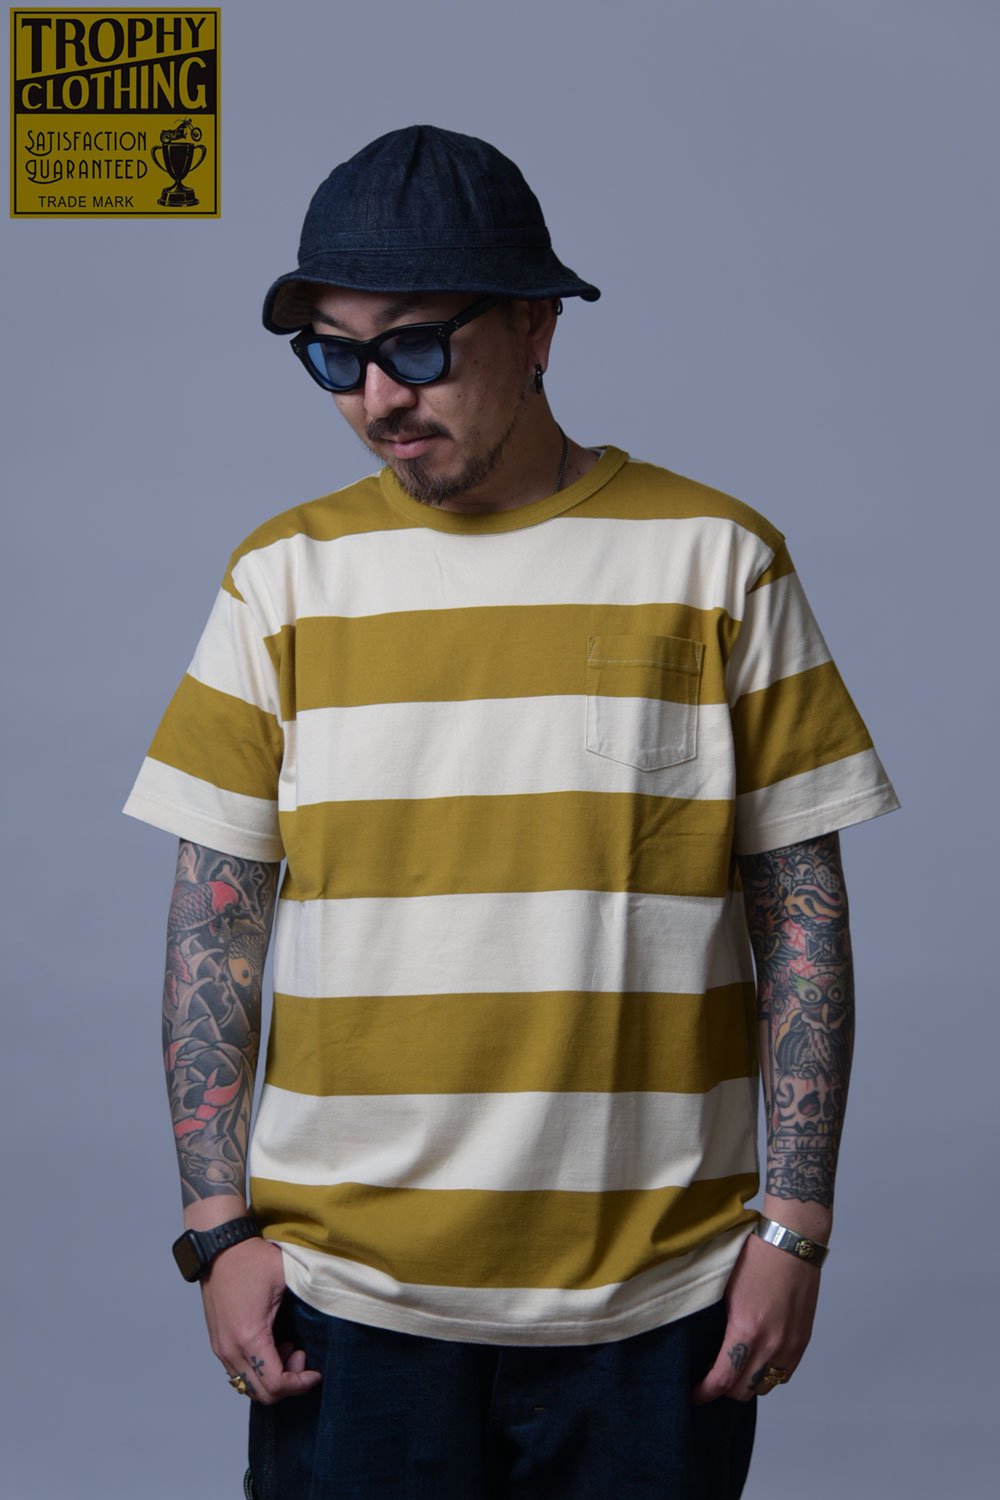 TROPHY CLOTHING(トロフィークロージング) ボーダーTシャツ WIDE BORDER S/S TEE TR23SS-205 通販正規取扱  ハーレムストア公式通販サイト